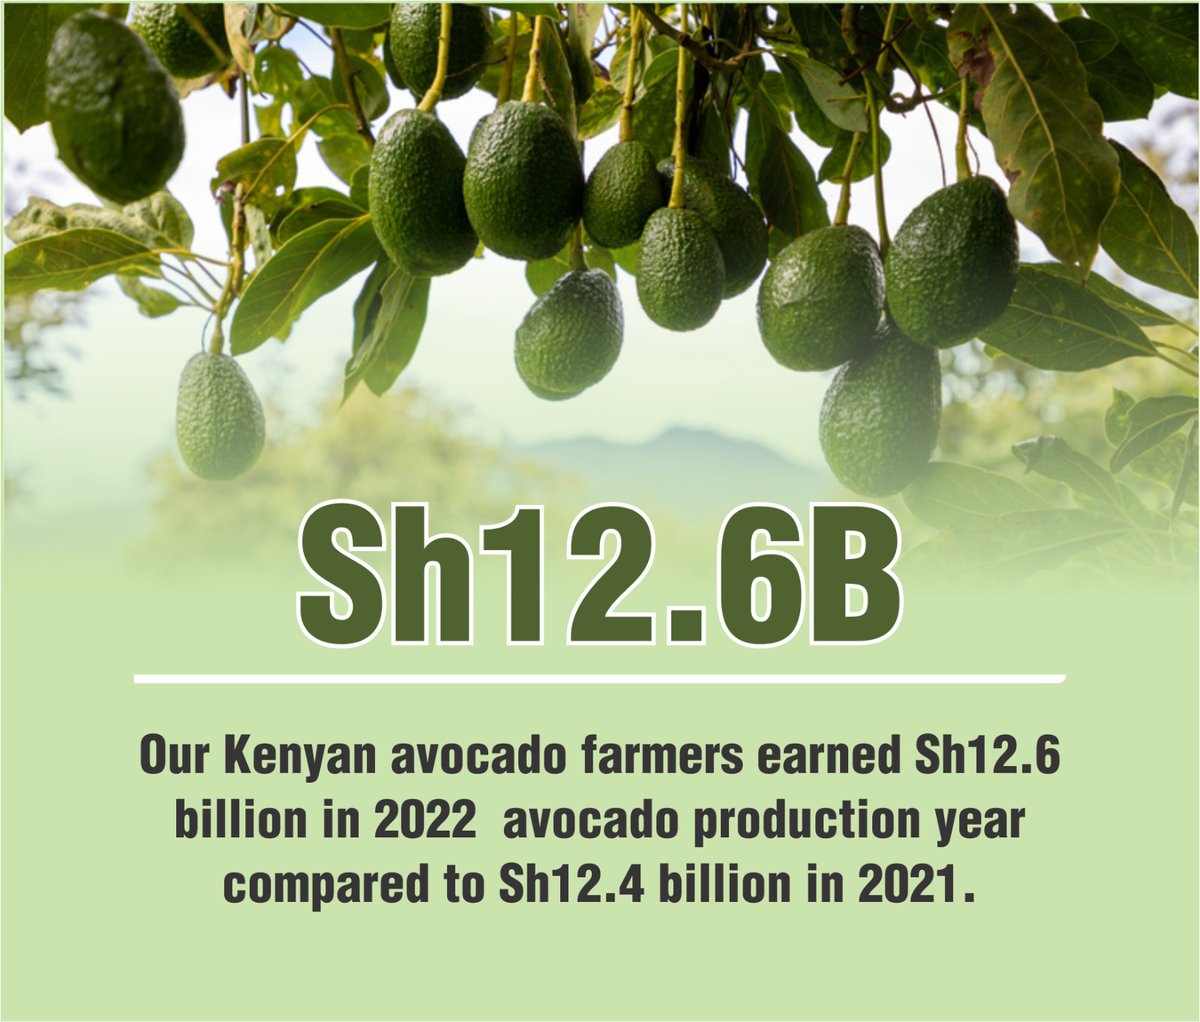 Kenya earned Ksh12.6 billion from avocado exports in 2023, an increase of over 30 per cent from the 2022 earnings.

DP Rigathi Avocado

#AvocadoMeetsRiggyG